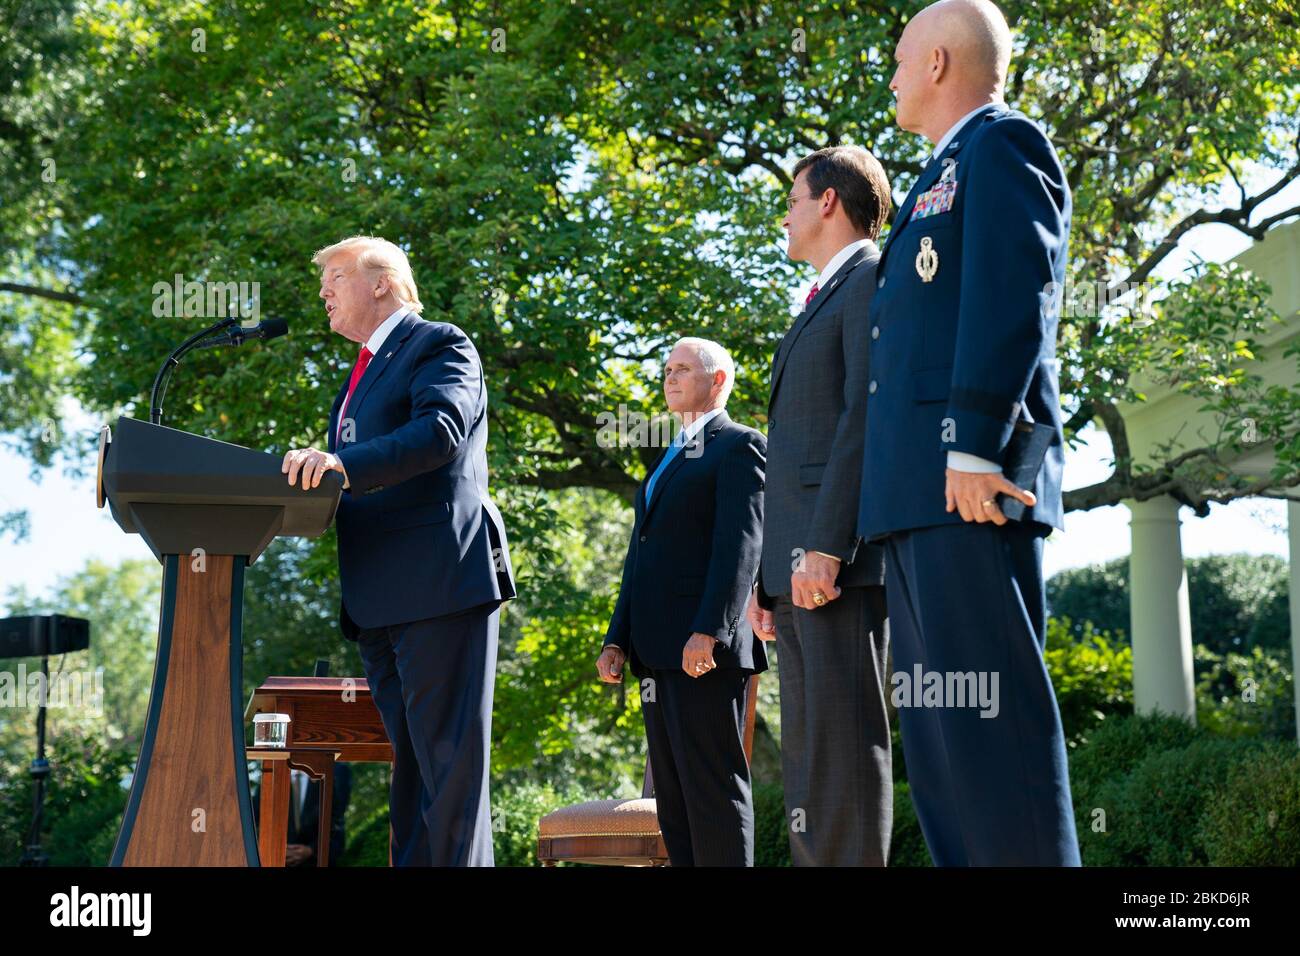 President Donald J. Trump, joined by Vice President Mike Pence, Secretary of Defense Mark Esper and General John ”Jay” Raymond Commander of USSPACECOM, delivers remarks at the Establishment of the U.S. Space Command (USSPACECOM) Thursday, Aug. 29, 2019, in the Rose Garden of the White House. The Establishment of the U.S. Space Command Stock Photo